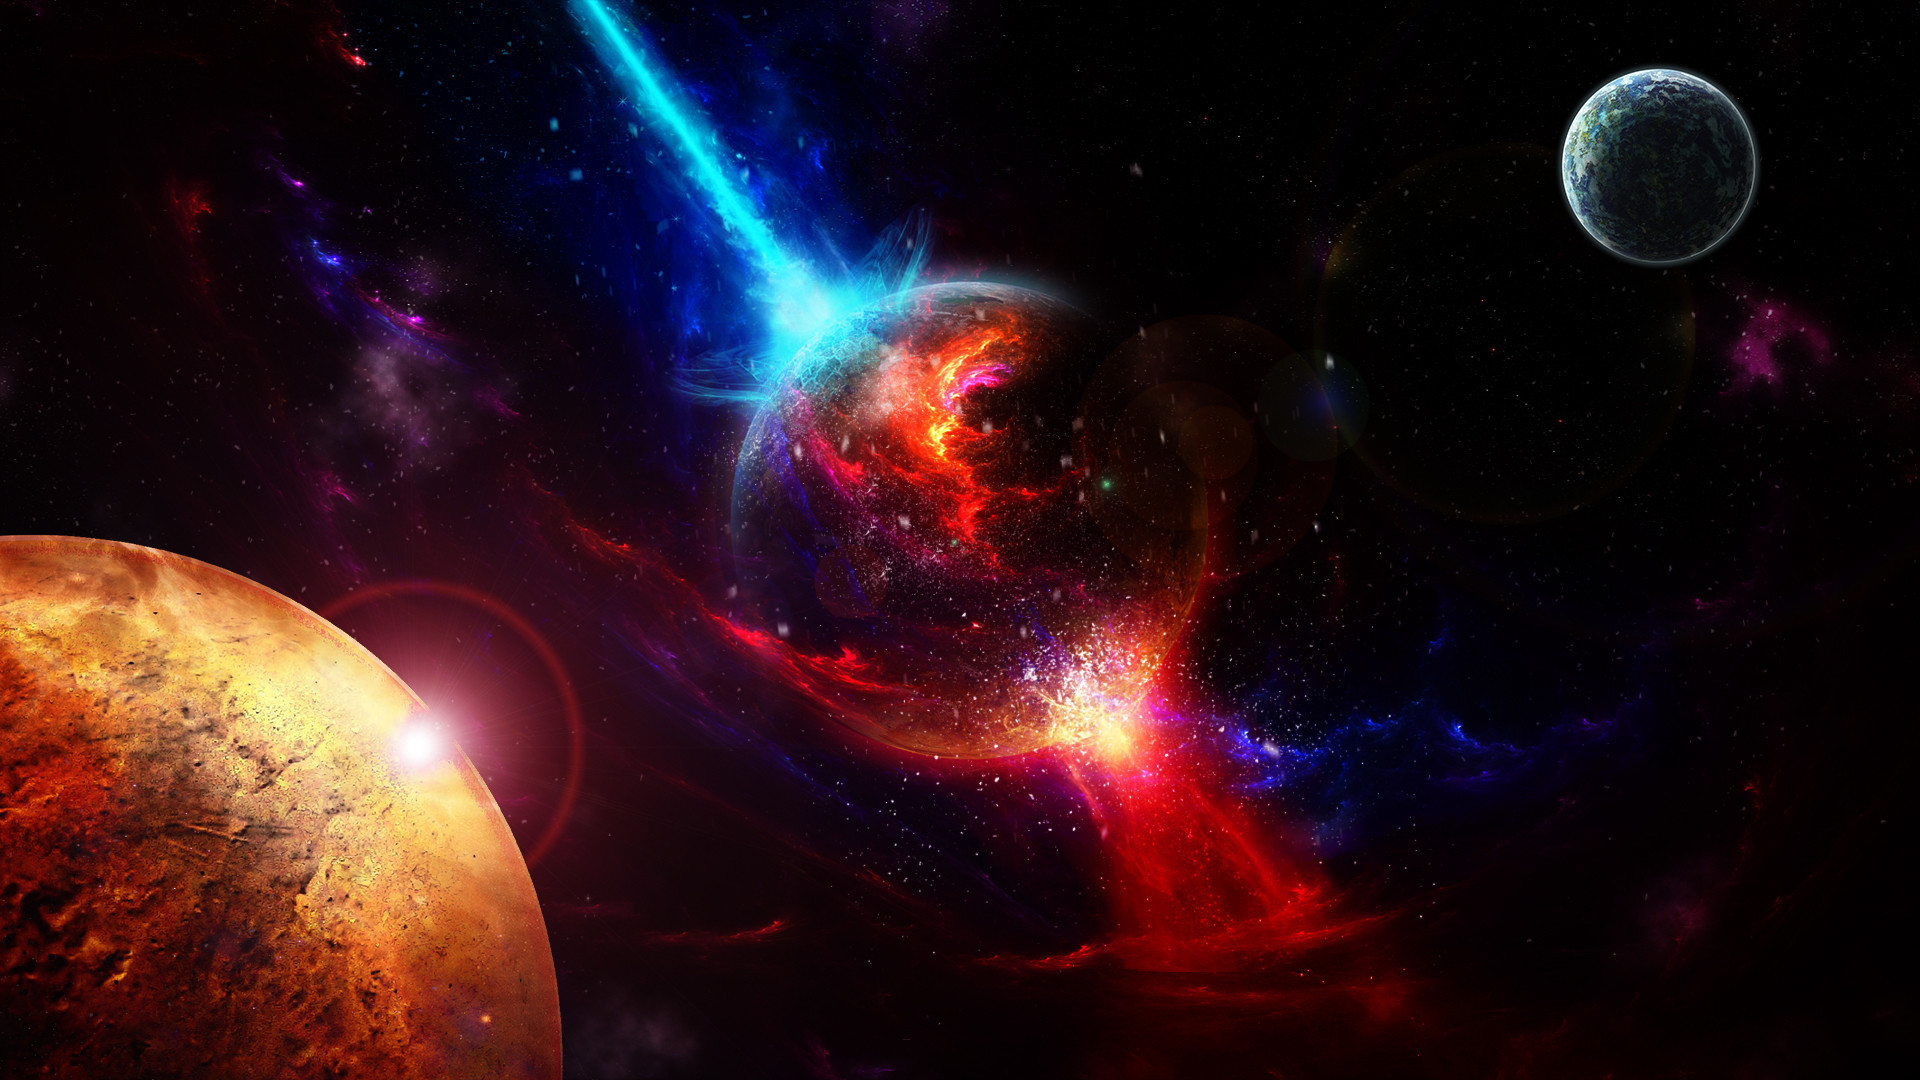 1920x1080  Space Planets Takeoff Explosion Wallpaper Â· 34 Â· Download Â· Res:   ...